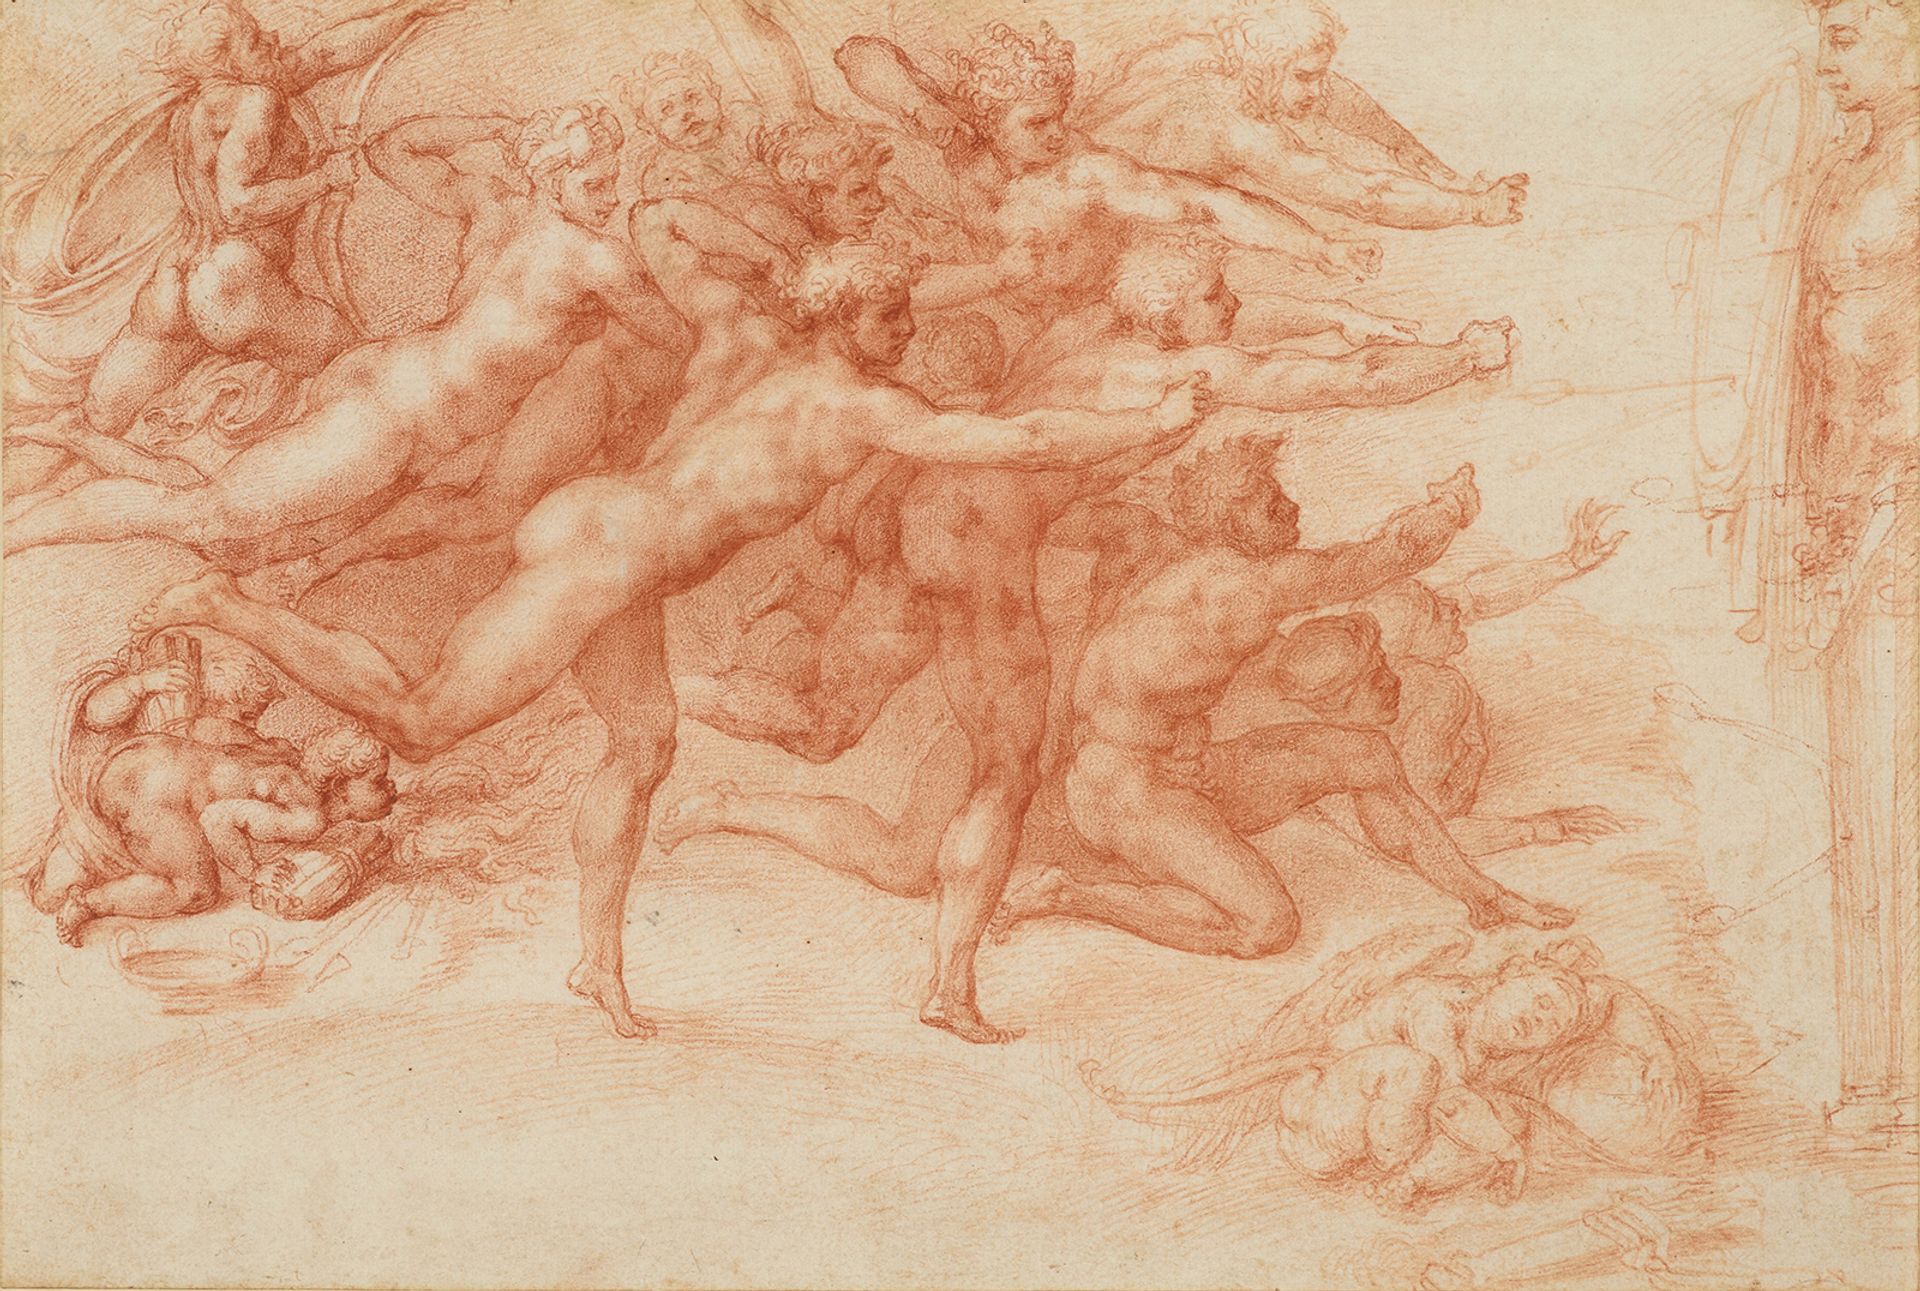 Michelangelo Buonarroti, Archers Shooting at a Herm (1530–33) ROYAL COLLECTION TRUST / © HER MAJESTY QUEEN ELIZABETH II 2017, www.royalcollection.org.uk